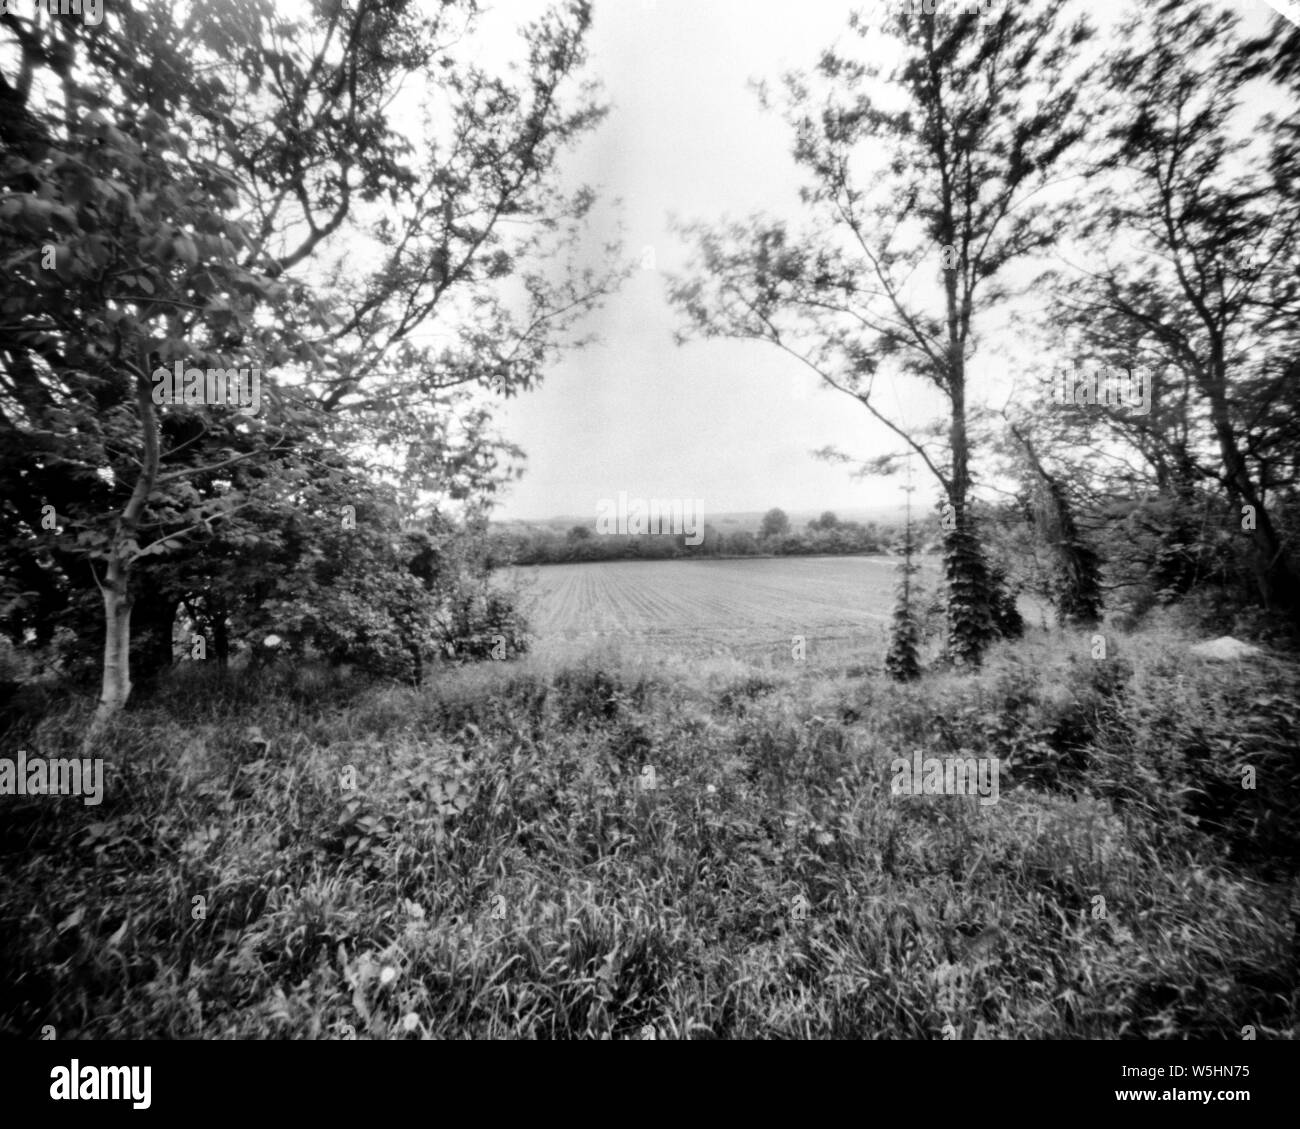 trees and grassland in the spring, this black and white camera obscura photo is NOT sharp due to camera characteristic. Taken on analogue photographic Stock Photo